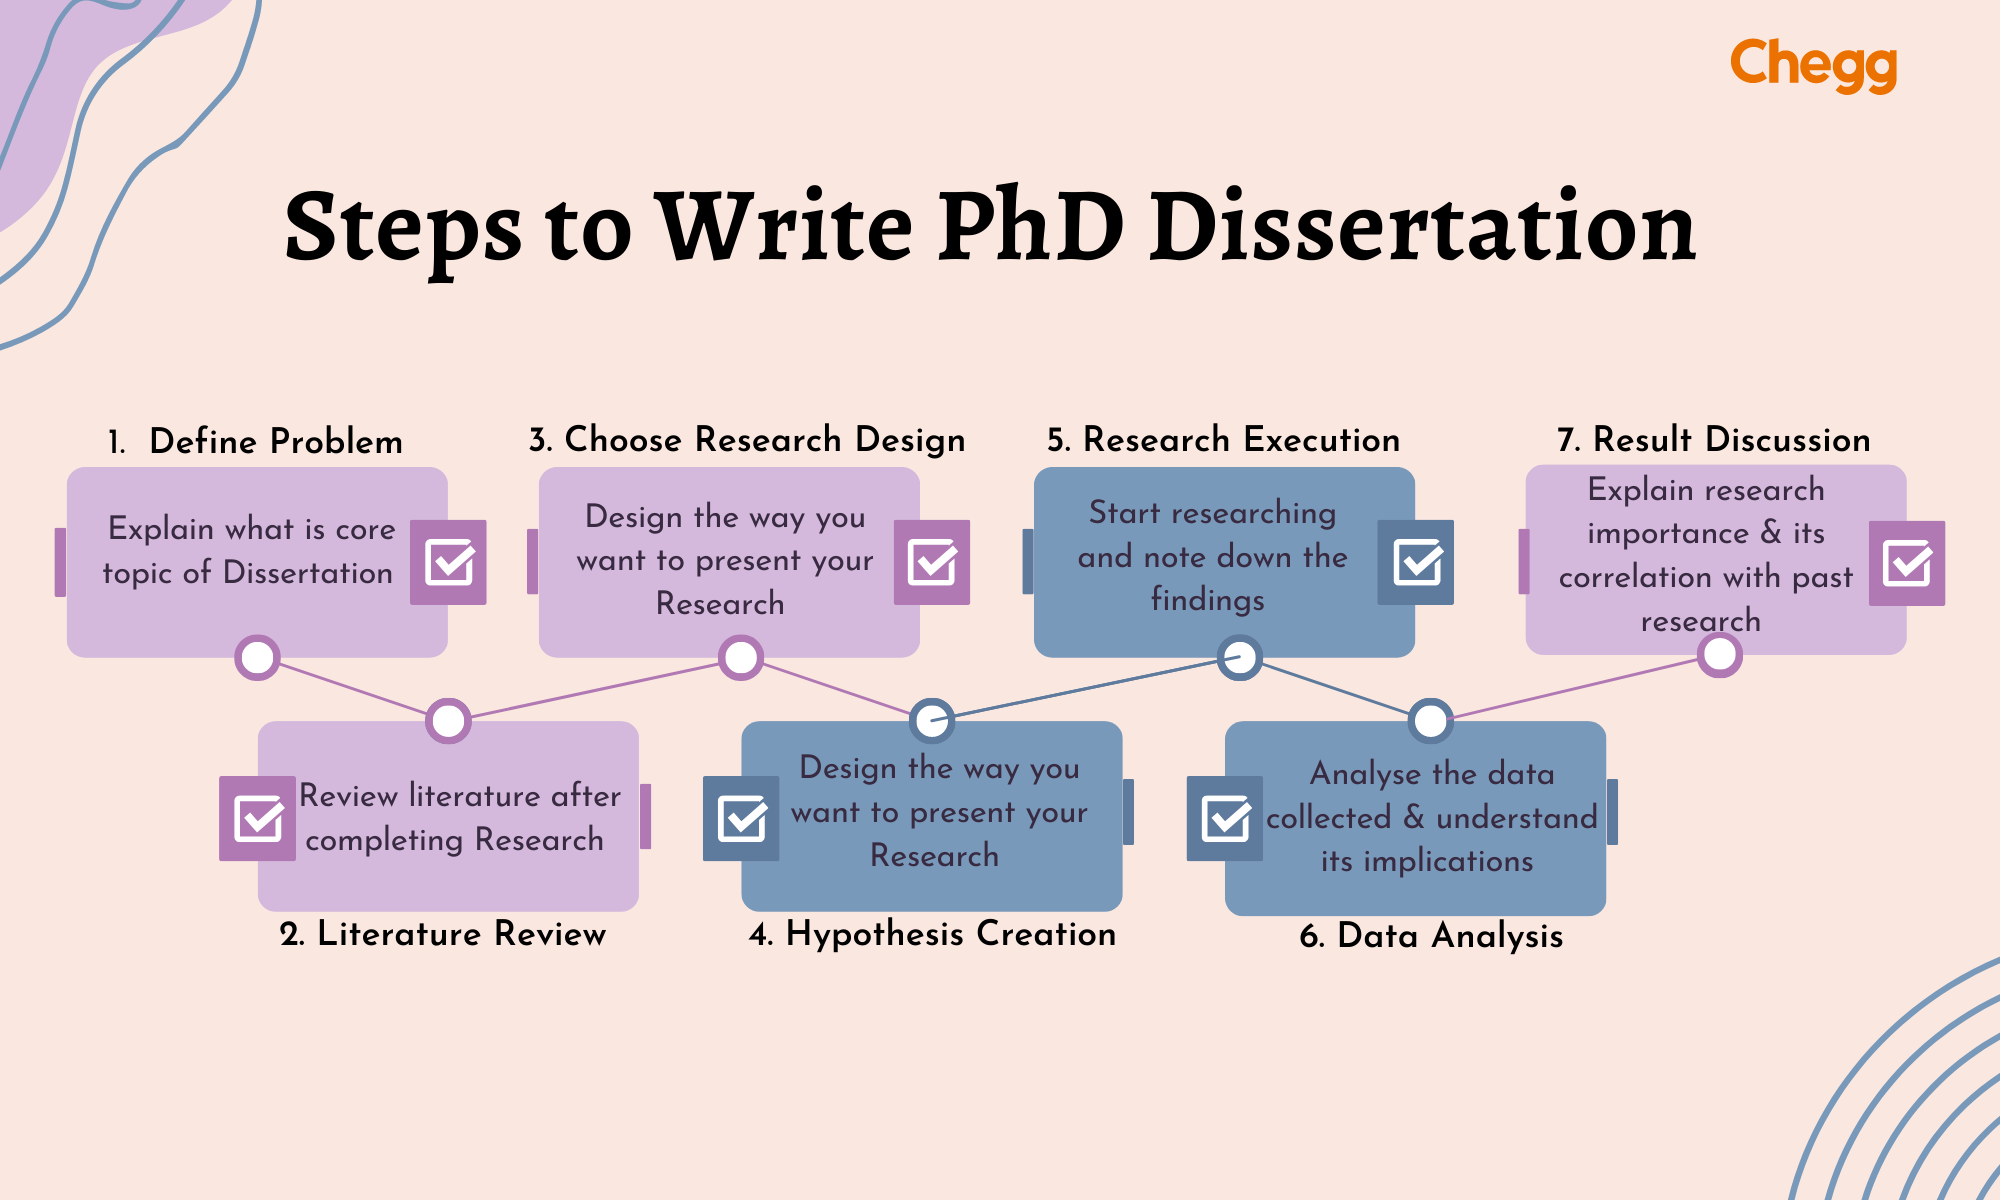 how to write phd after name in india